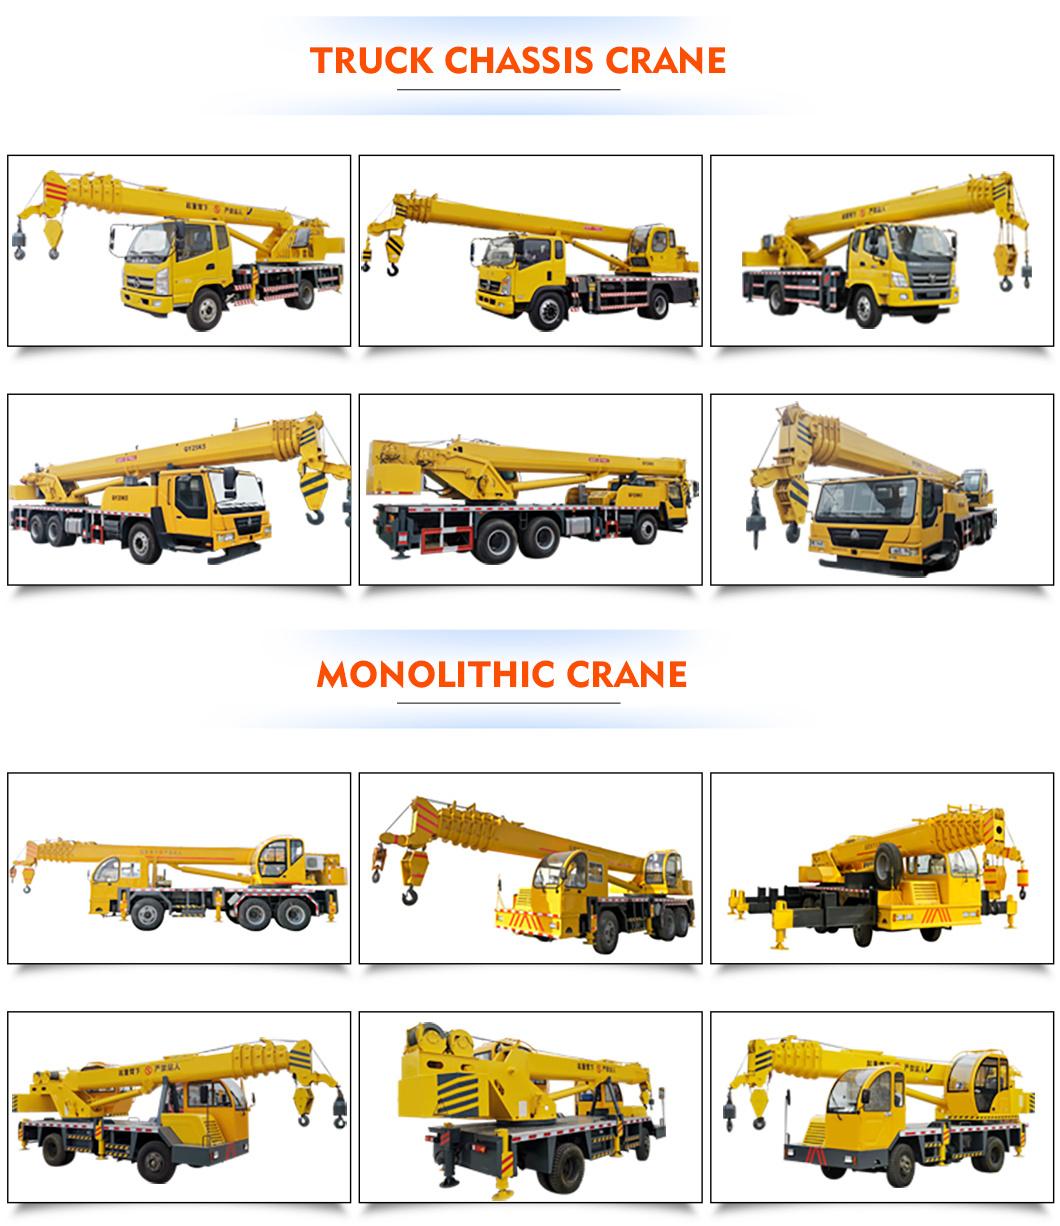 Hydraulic Proportional Control System Hydra Crane Price Picture 5 Ton Hydra Crane for Sale in India